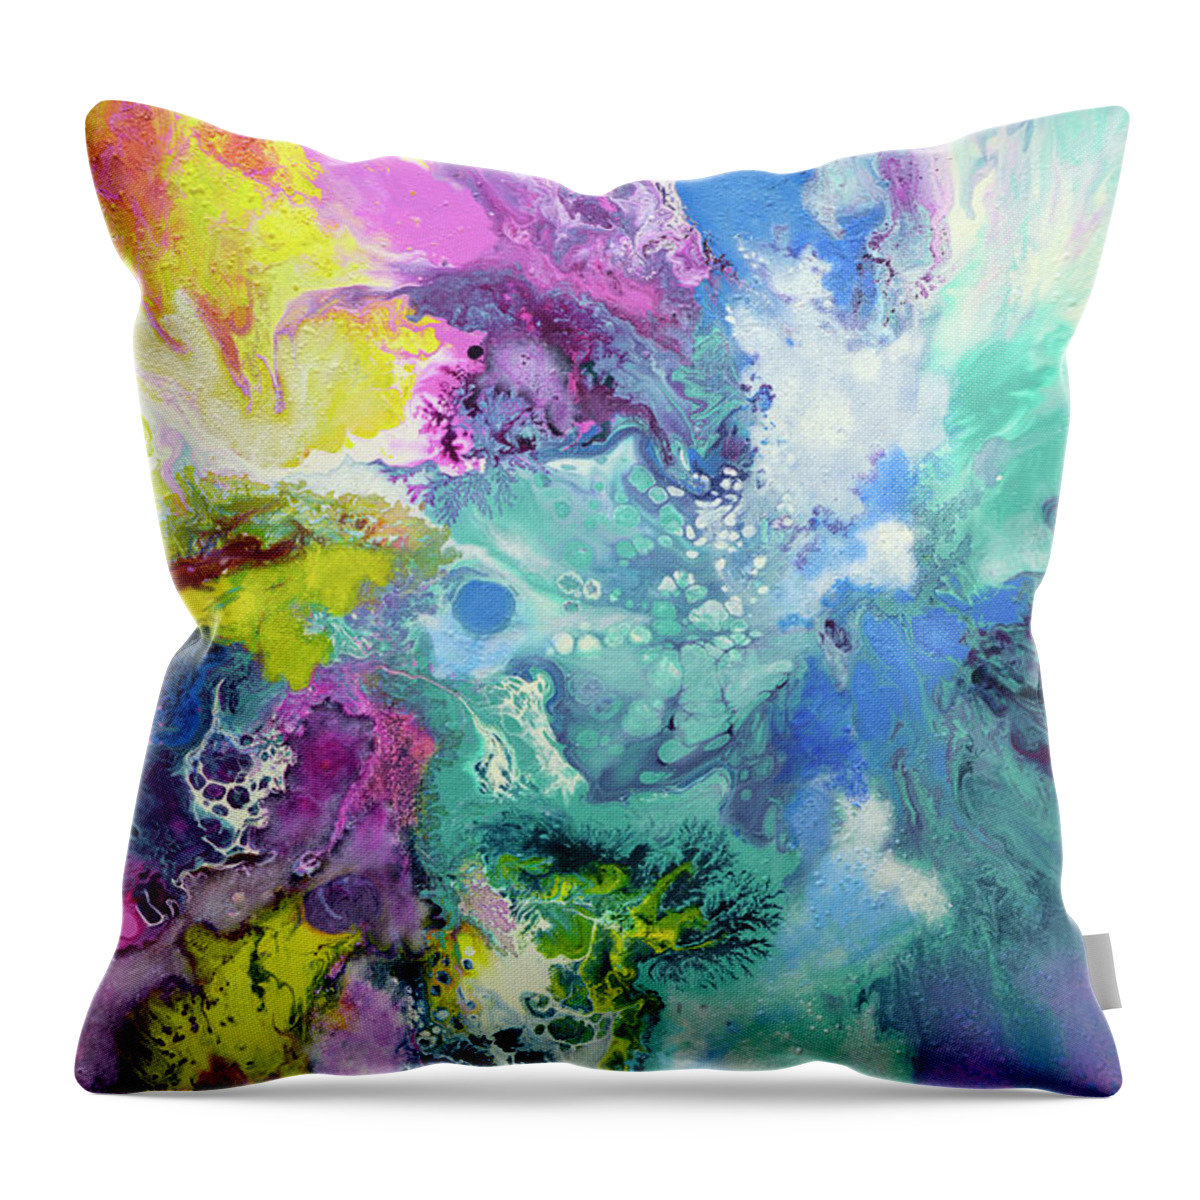 When The Angel Came Throw Pillow featuring the painting When the Angel Came by Sally Trace